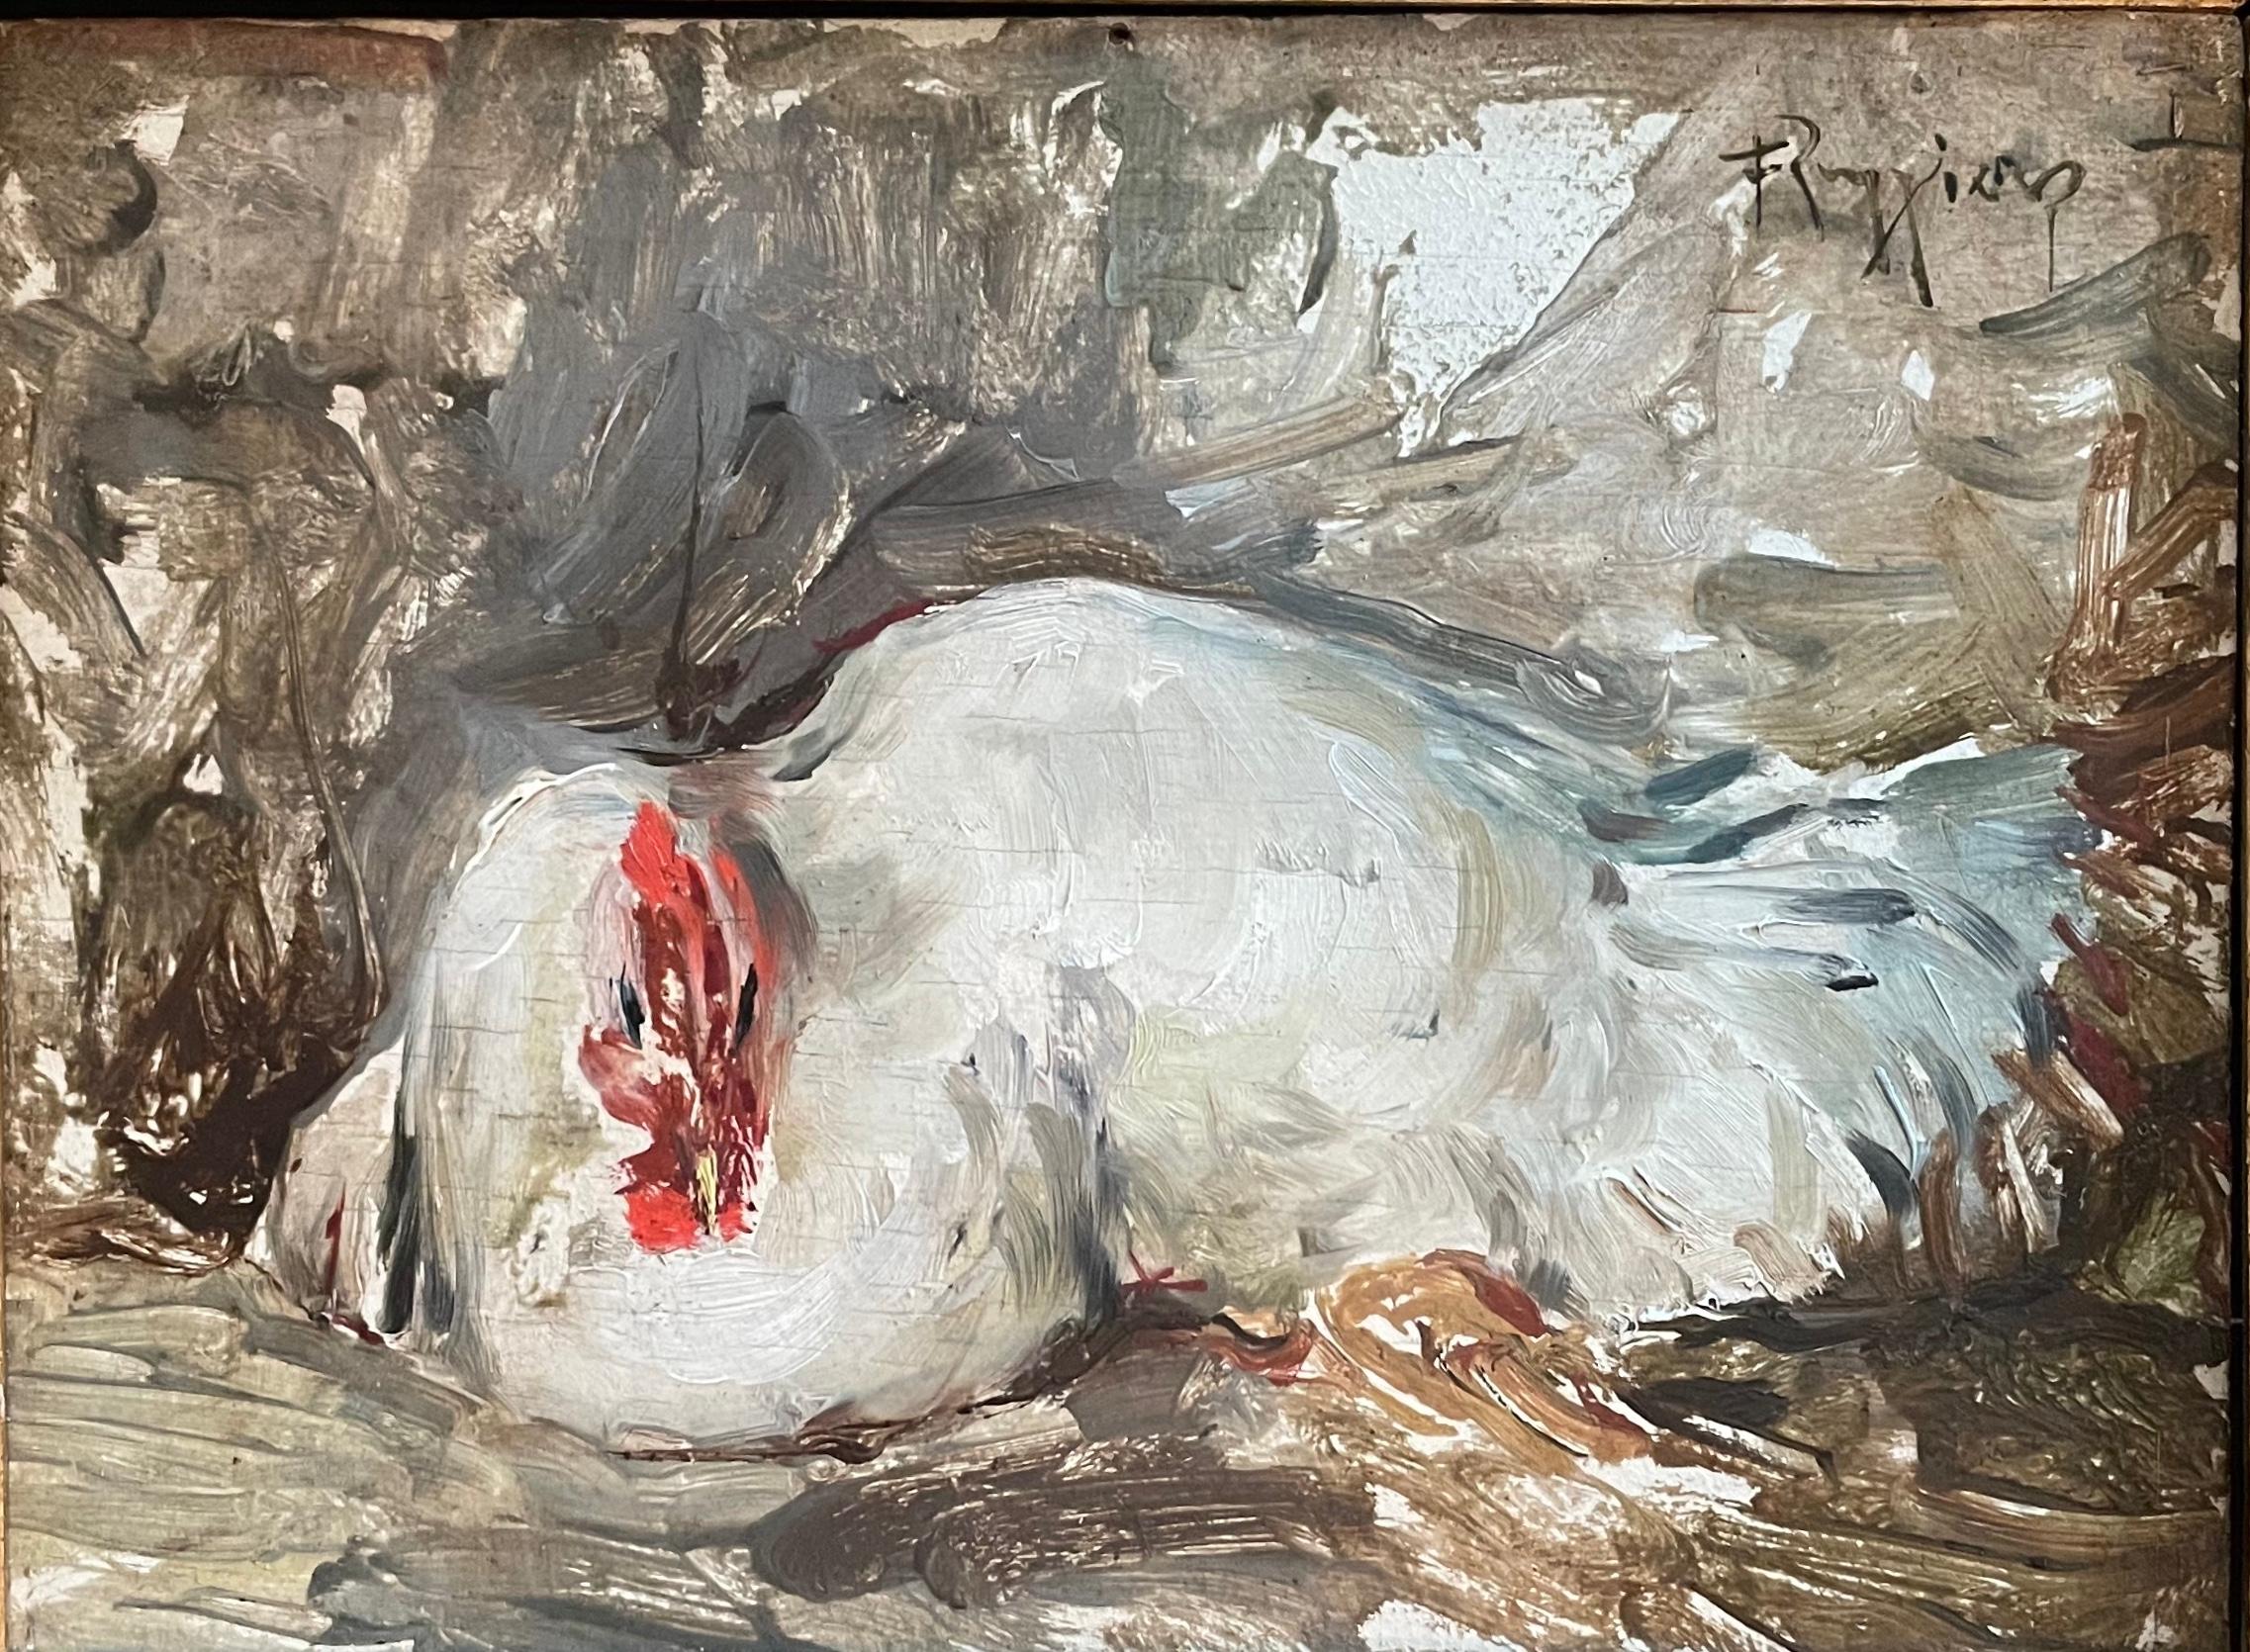 Franco Ruggiero (1910-1996), Mother Hen, 1940's. Vintage Italian farmhouse painting of hen in original gold frame with label on reverse from exhibition in Milan in 1945. Italy circa 1940’s.
Dimensions: 15” W x 12.5” H x 1.5” D; sight: 9” W x 7” H